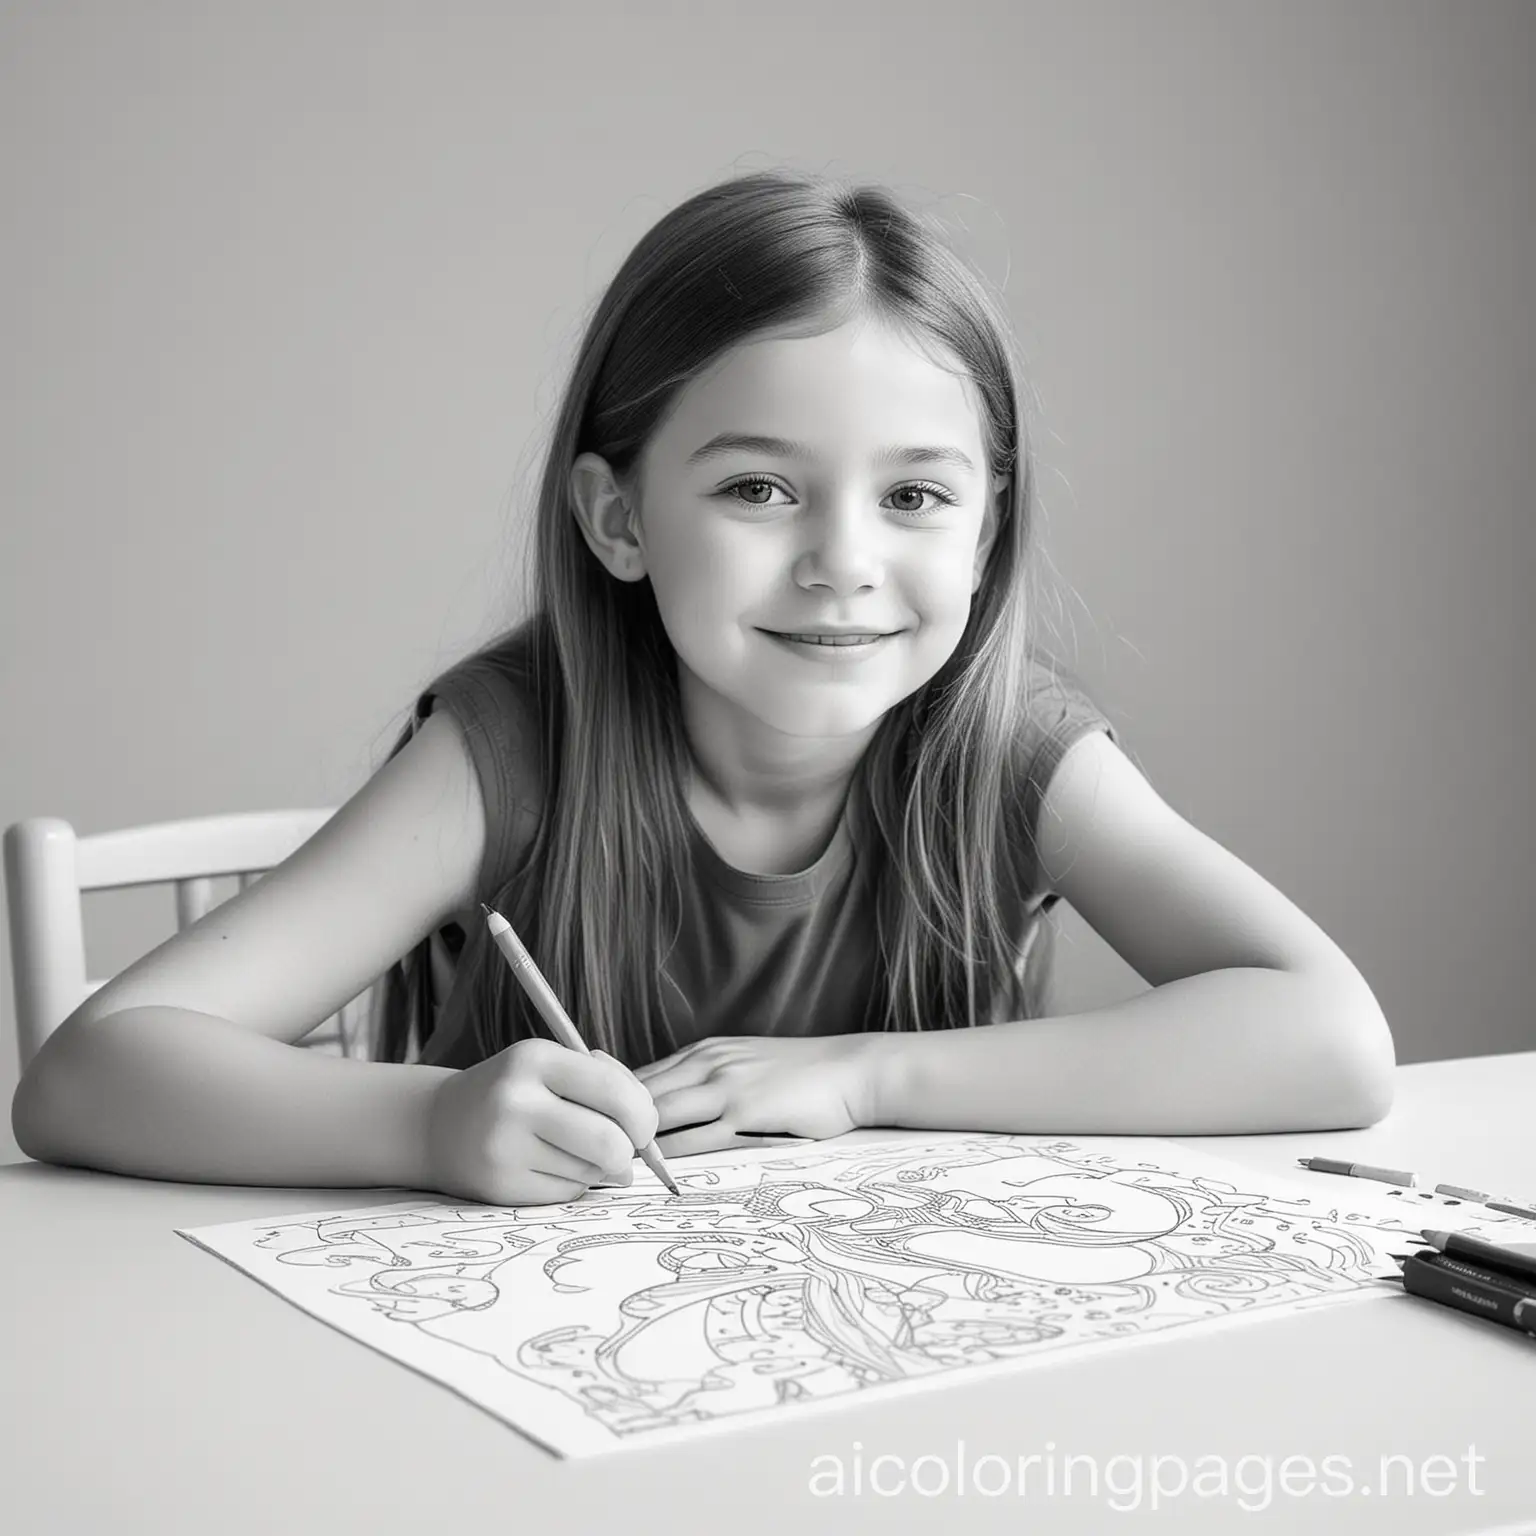 Young girl coloring at her desk, Coloring Page, black and white, line art, white background, Simplicity, Ample White Space. The background of the coloring page is plain white to make it easy for young children to color within the lines. The outlines of all the subjects are easy to distinguish, making it simple for kids to color without too much difficulty